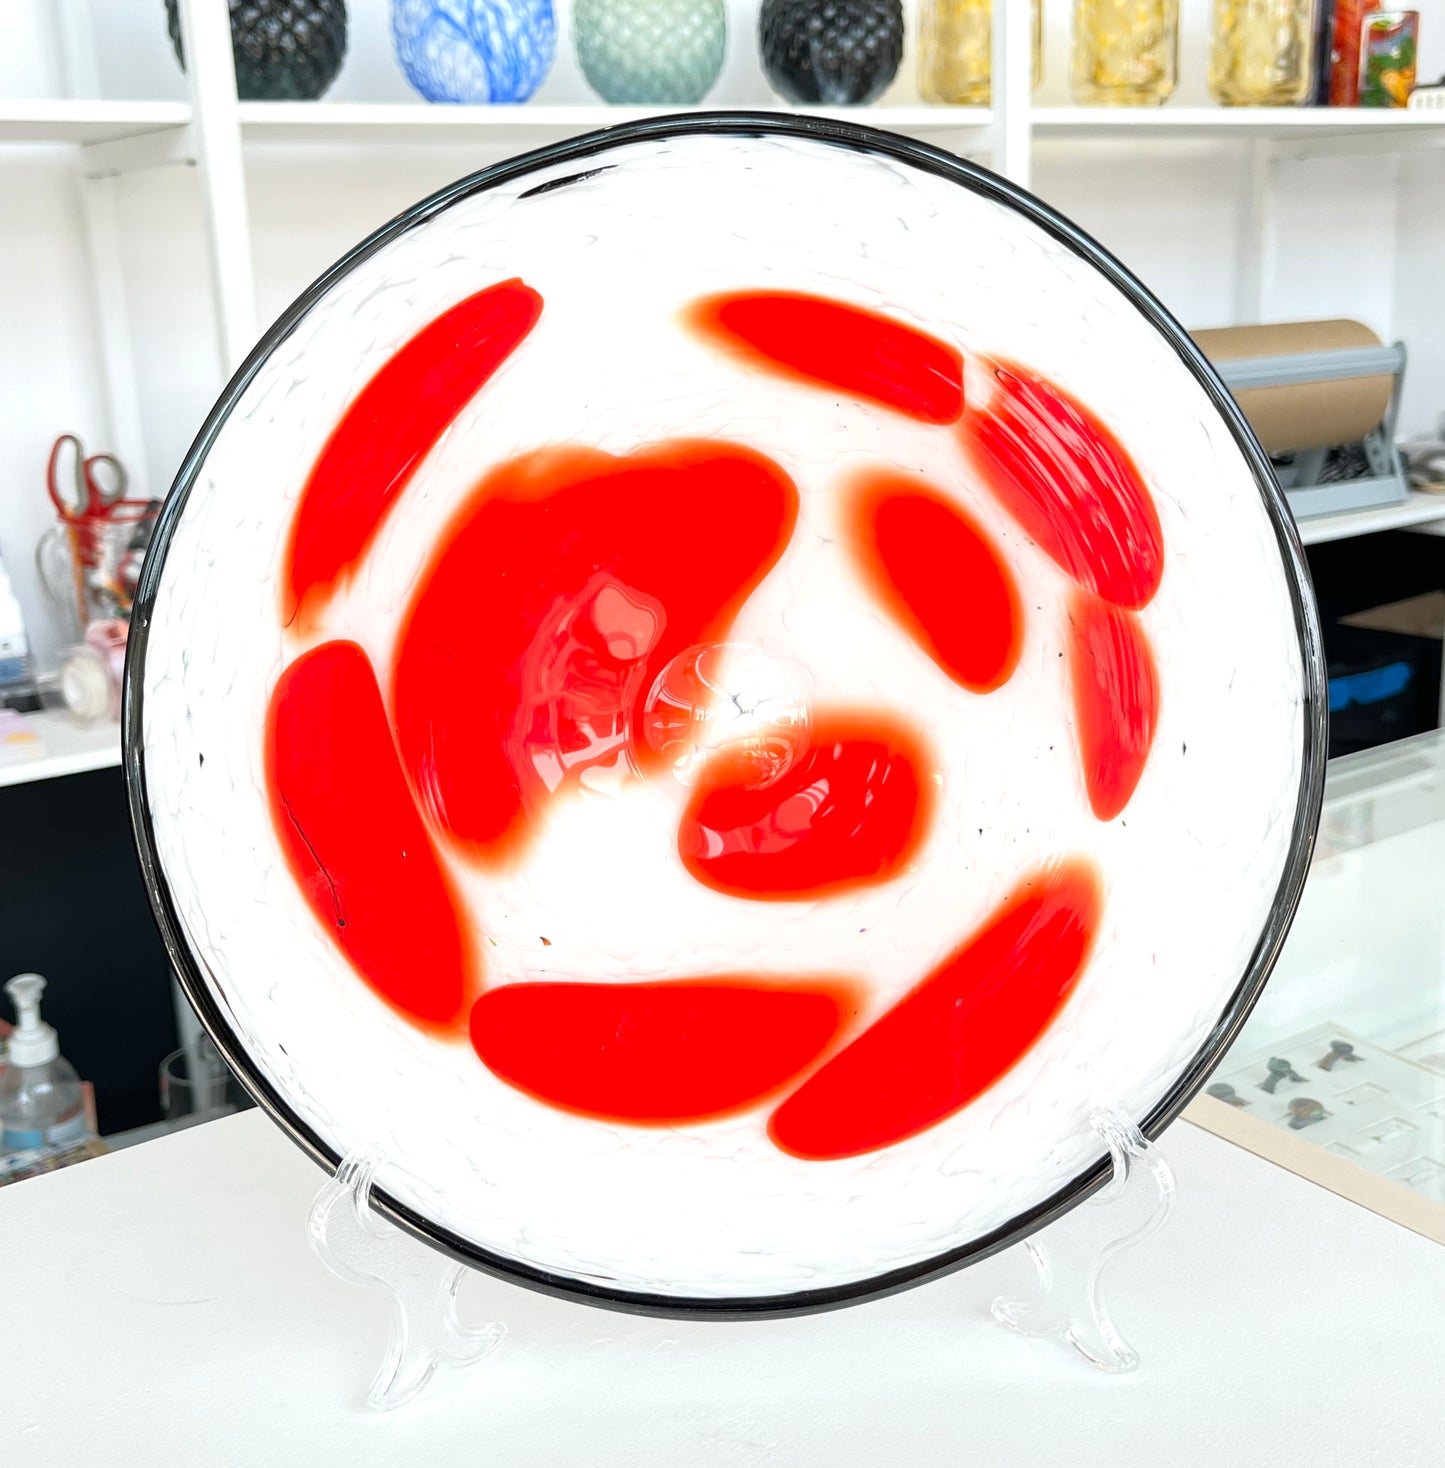 Rondel - 12" Red and White with Black Rim